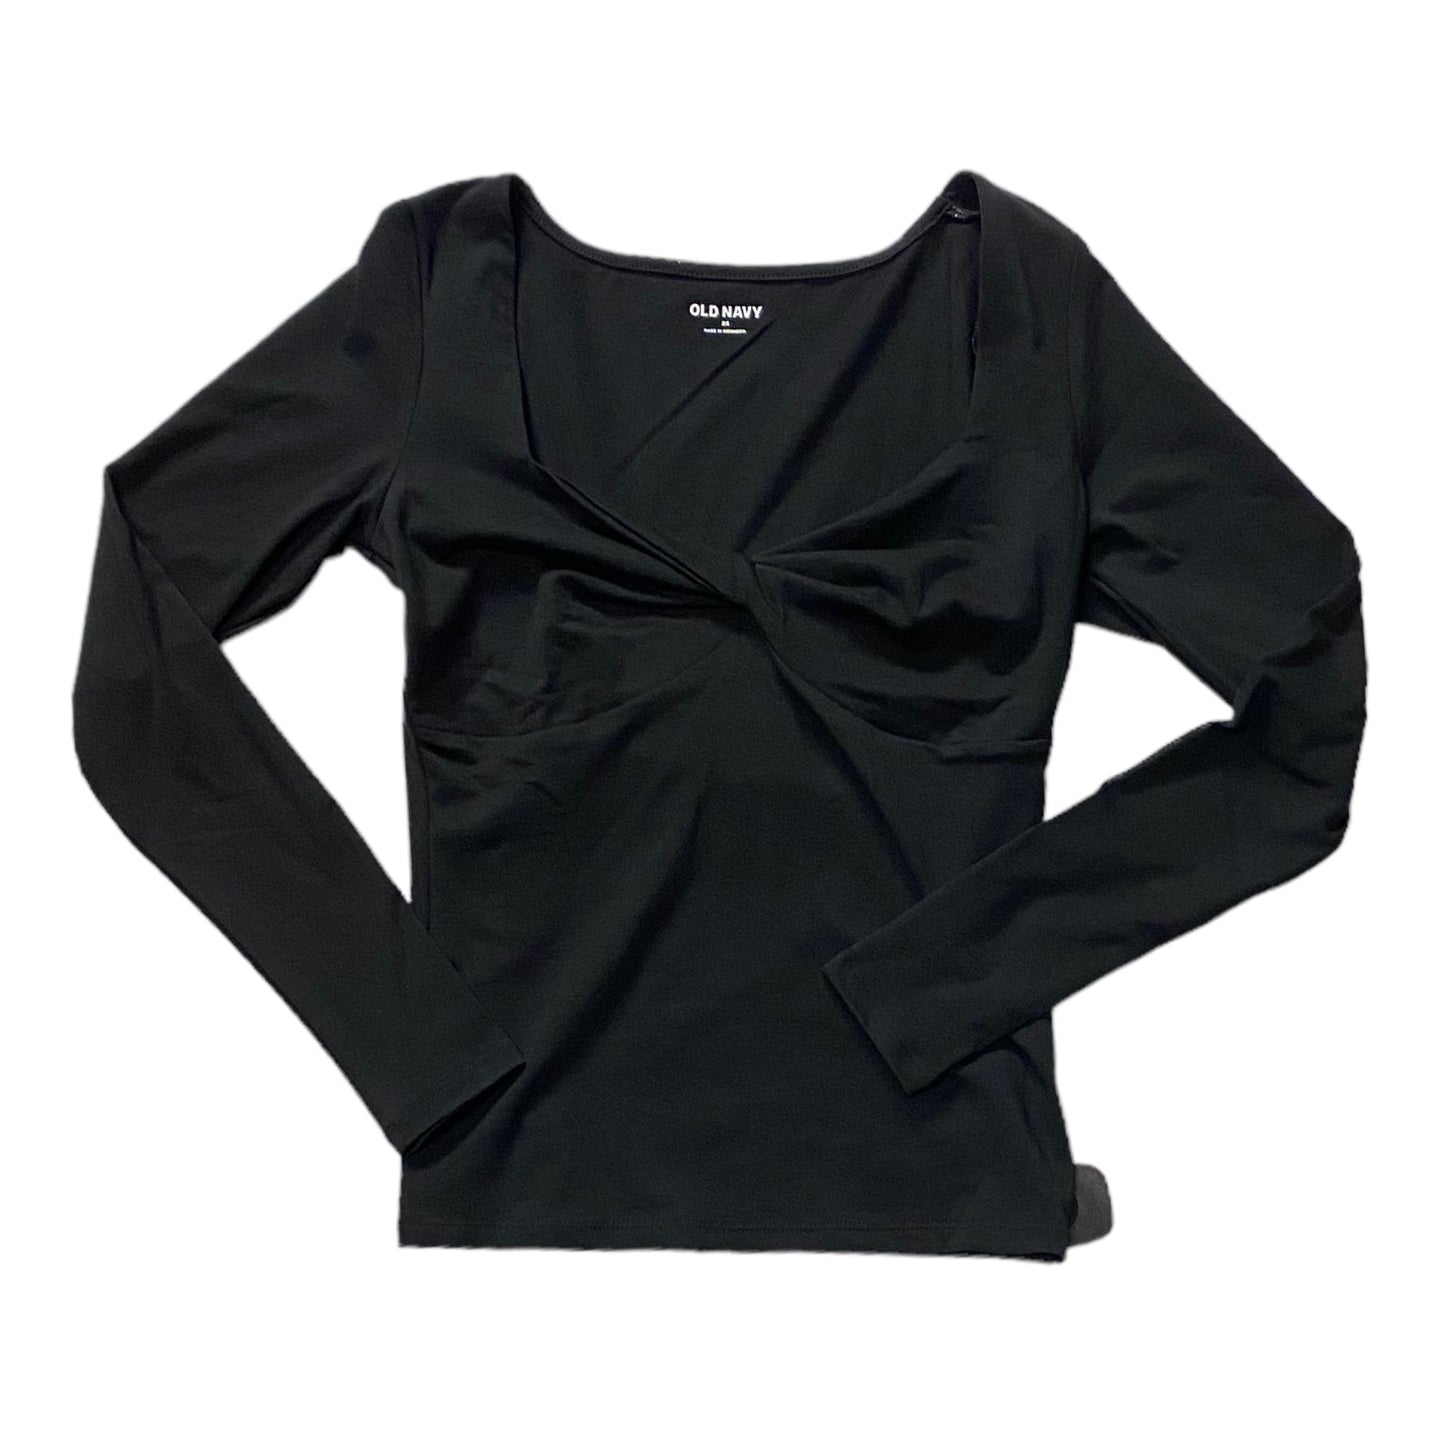 Black Top Long Sleeve Old Navy, Size Xs